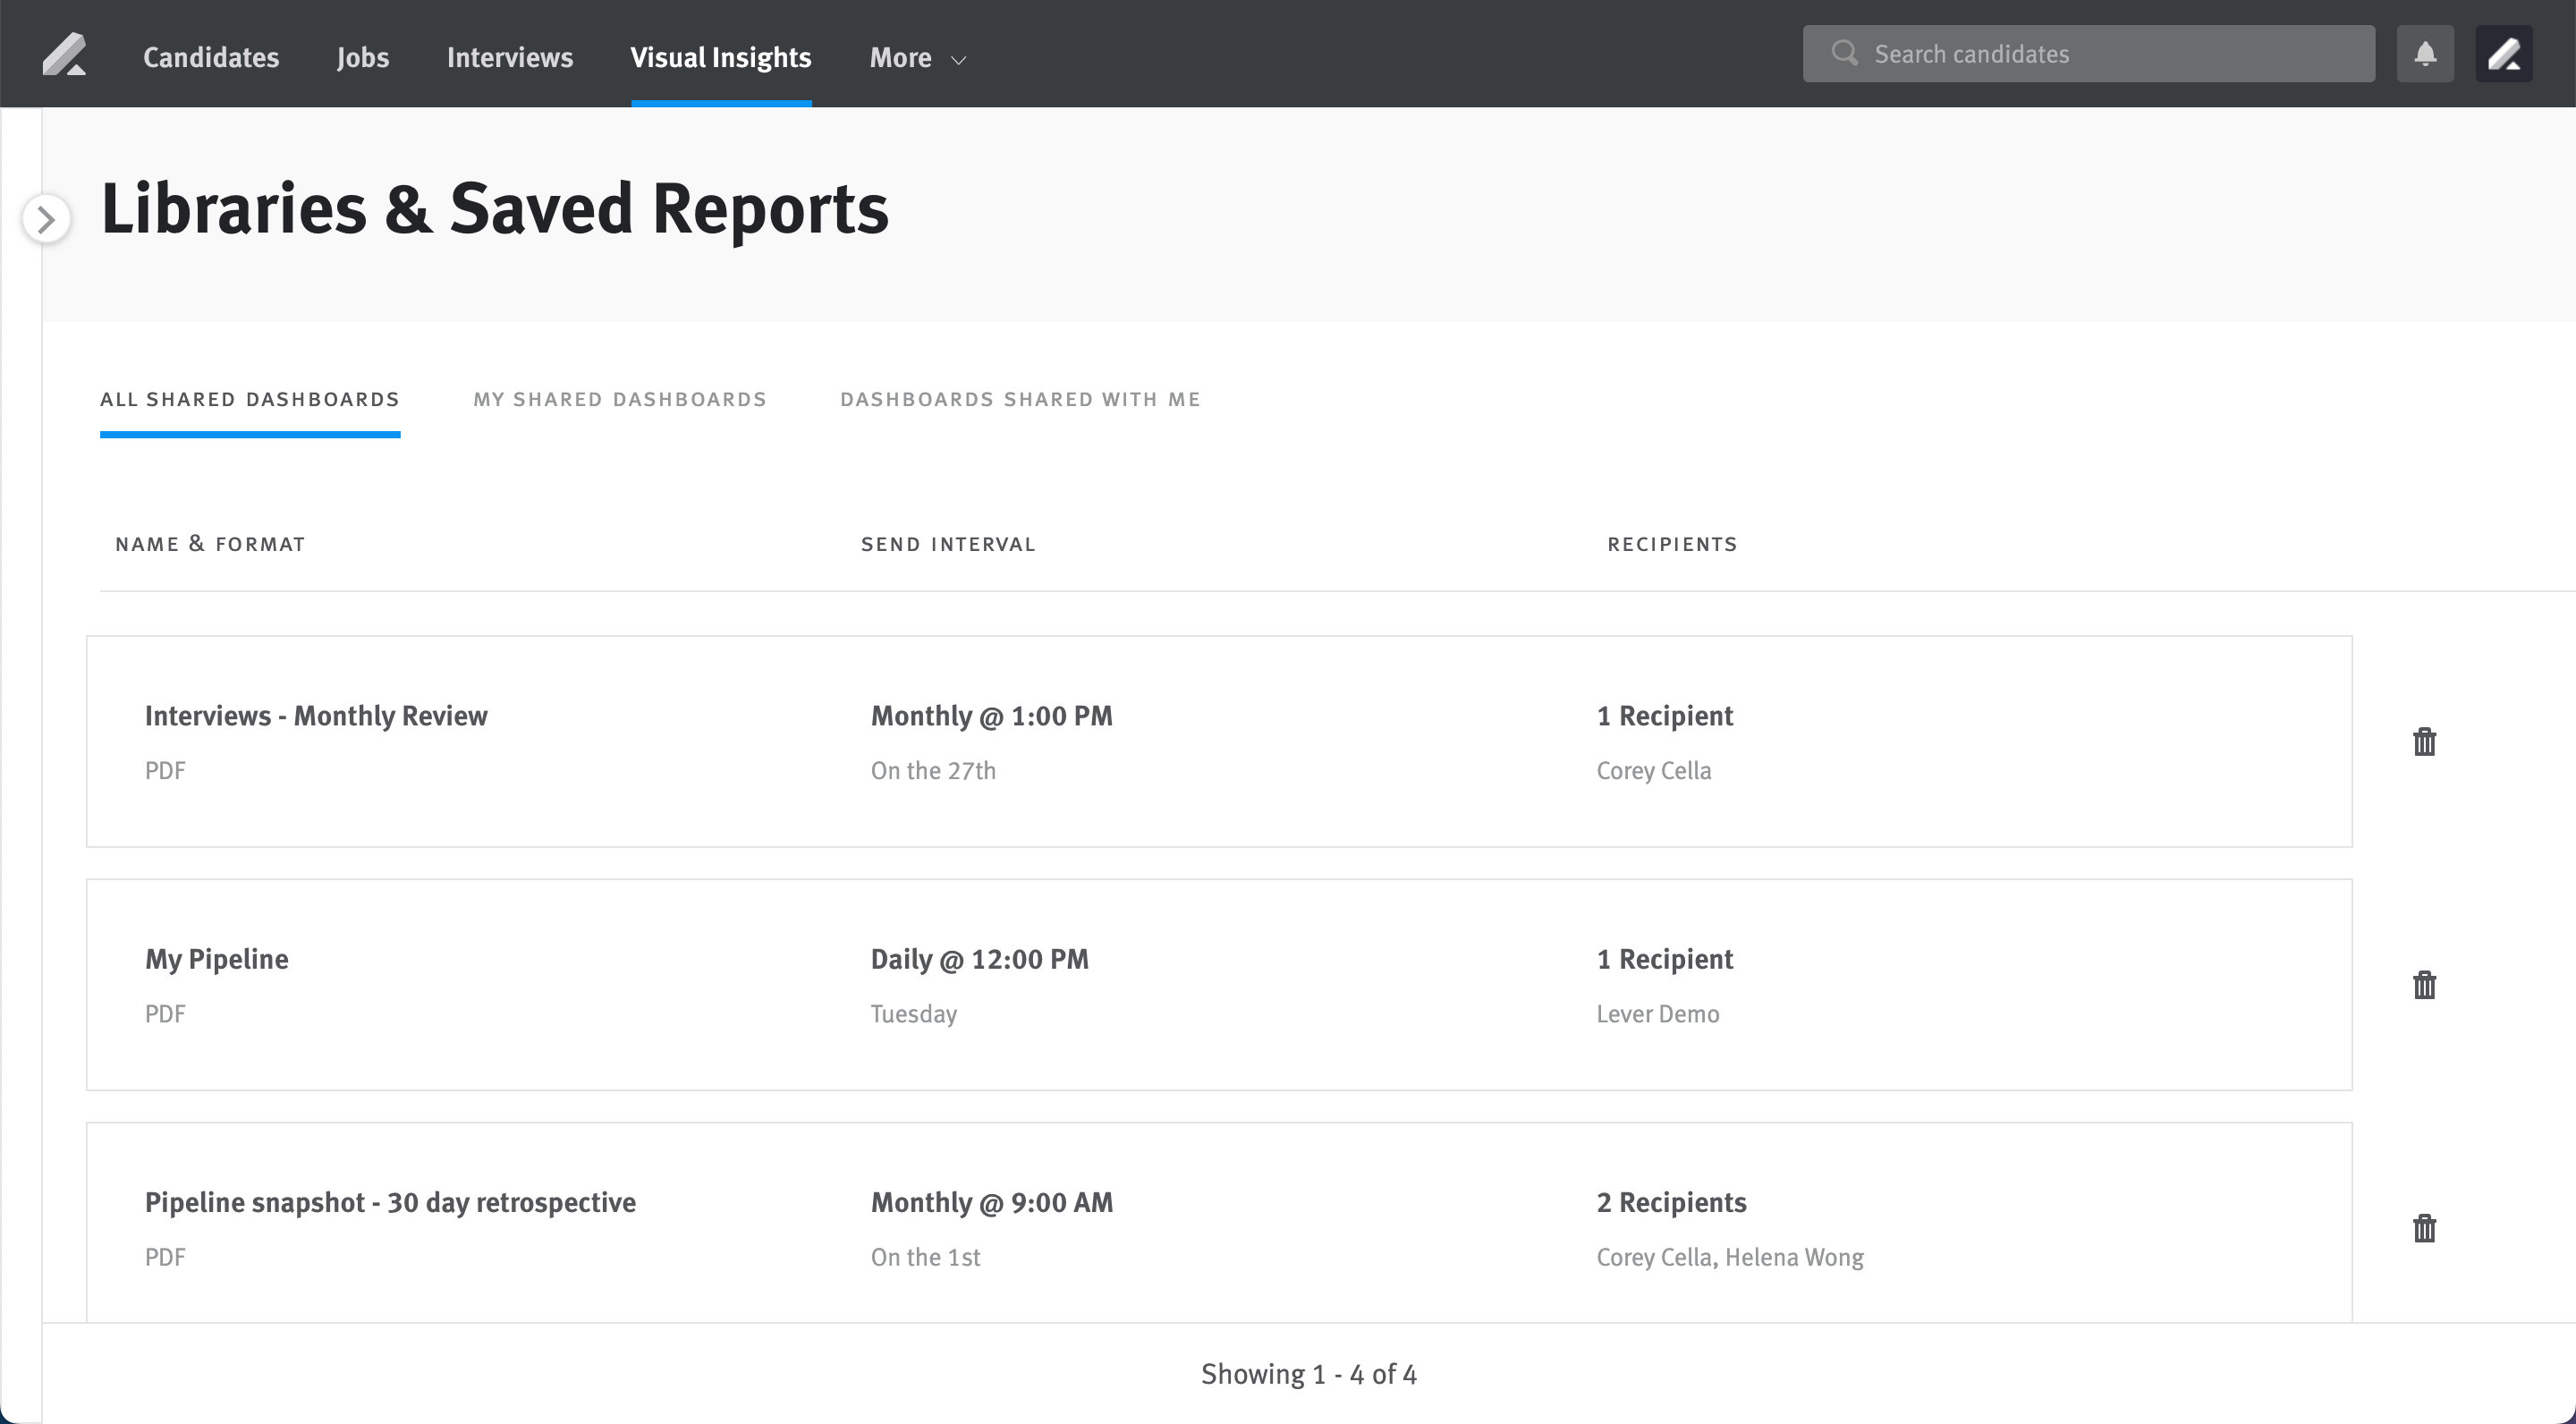 All shared dashboards library in Libraries and Saved Reports section.